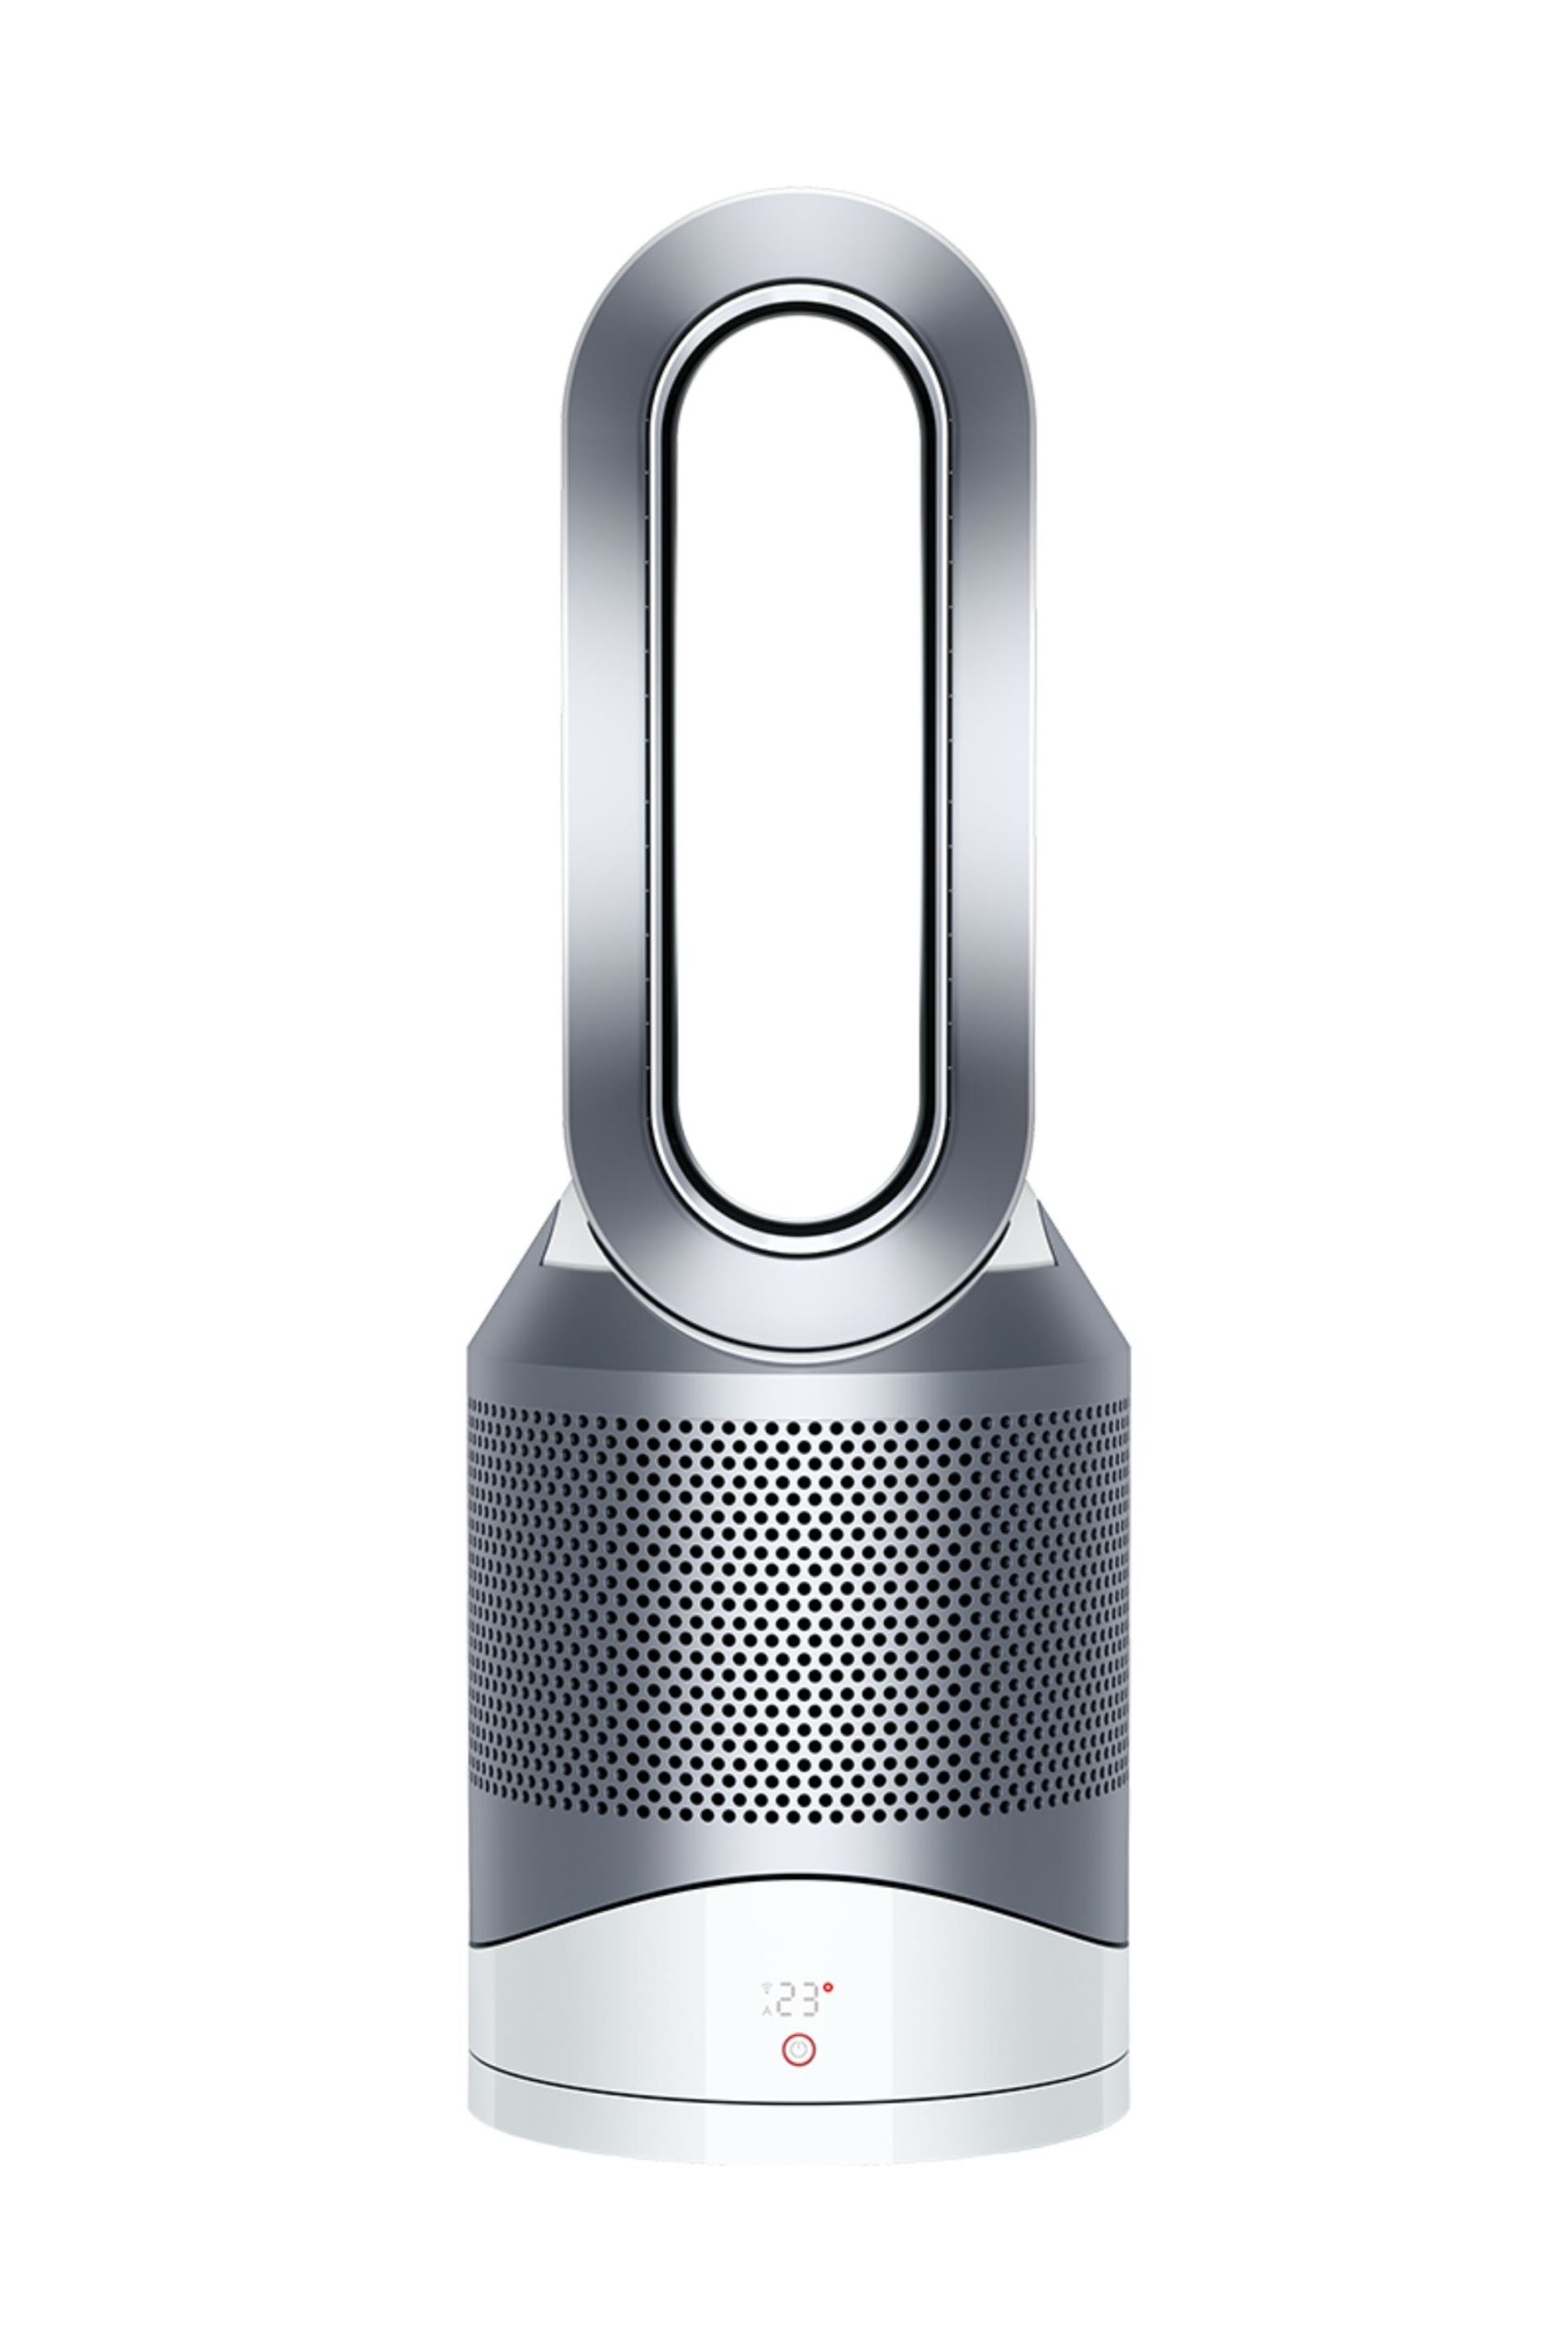 Dyson Pure Hot+Cool Link Black Friday